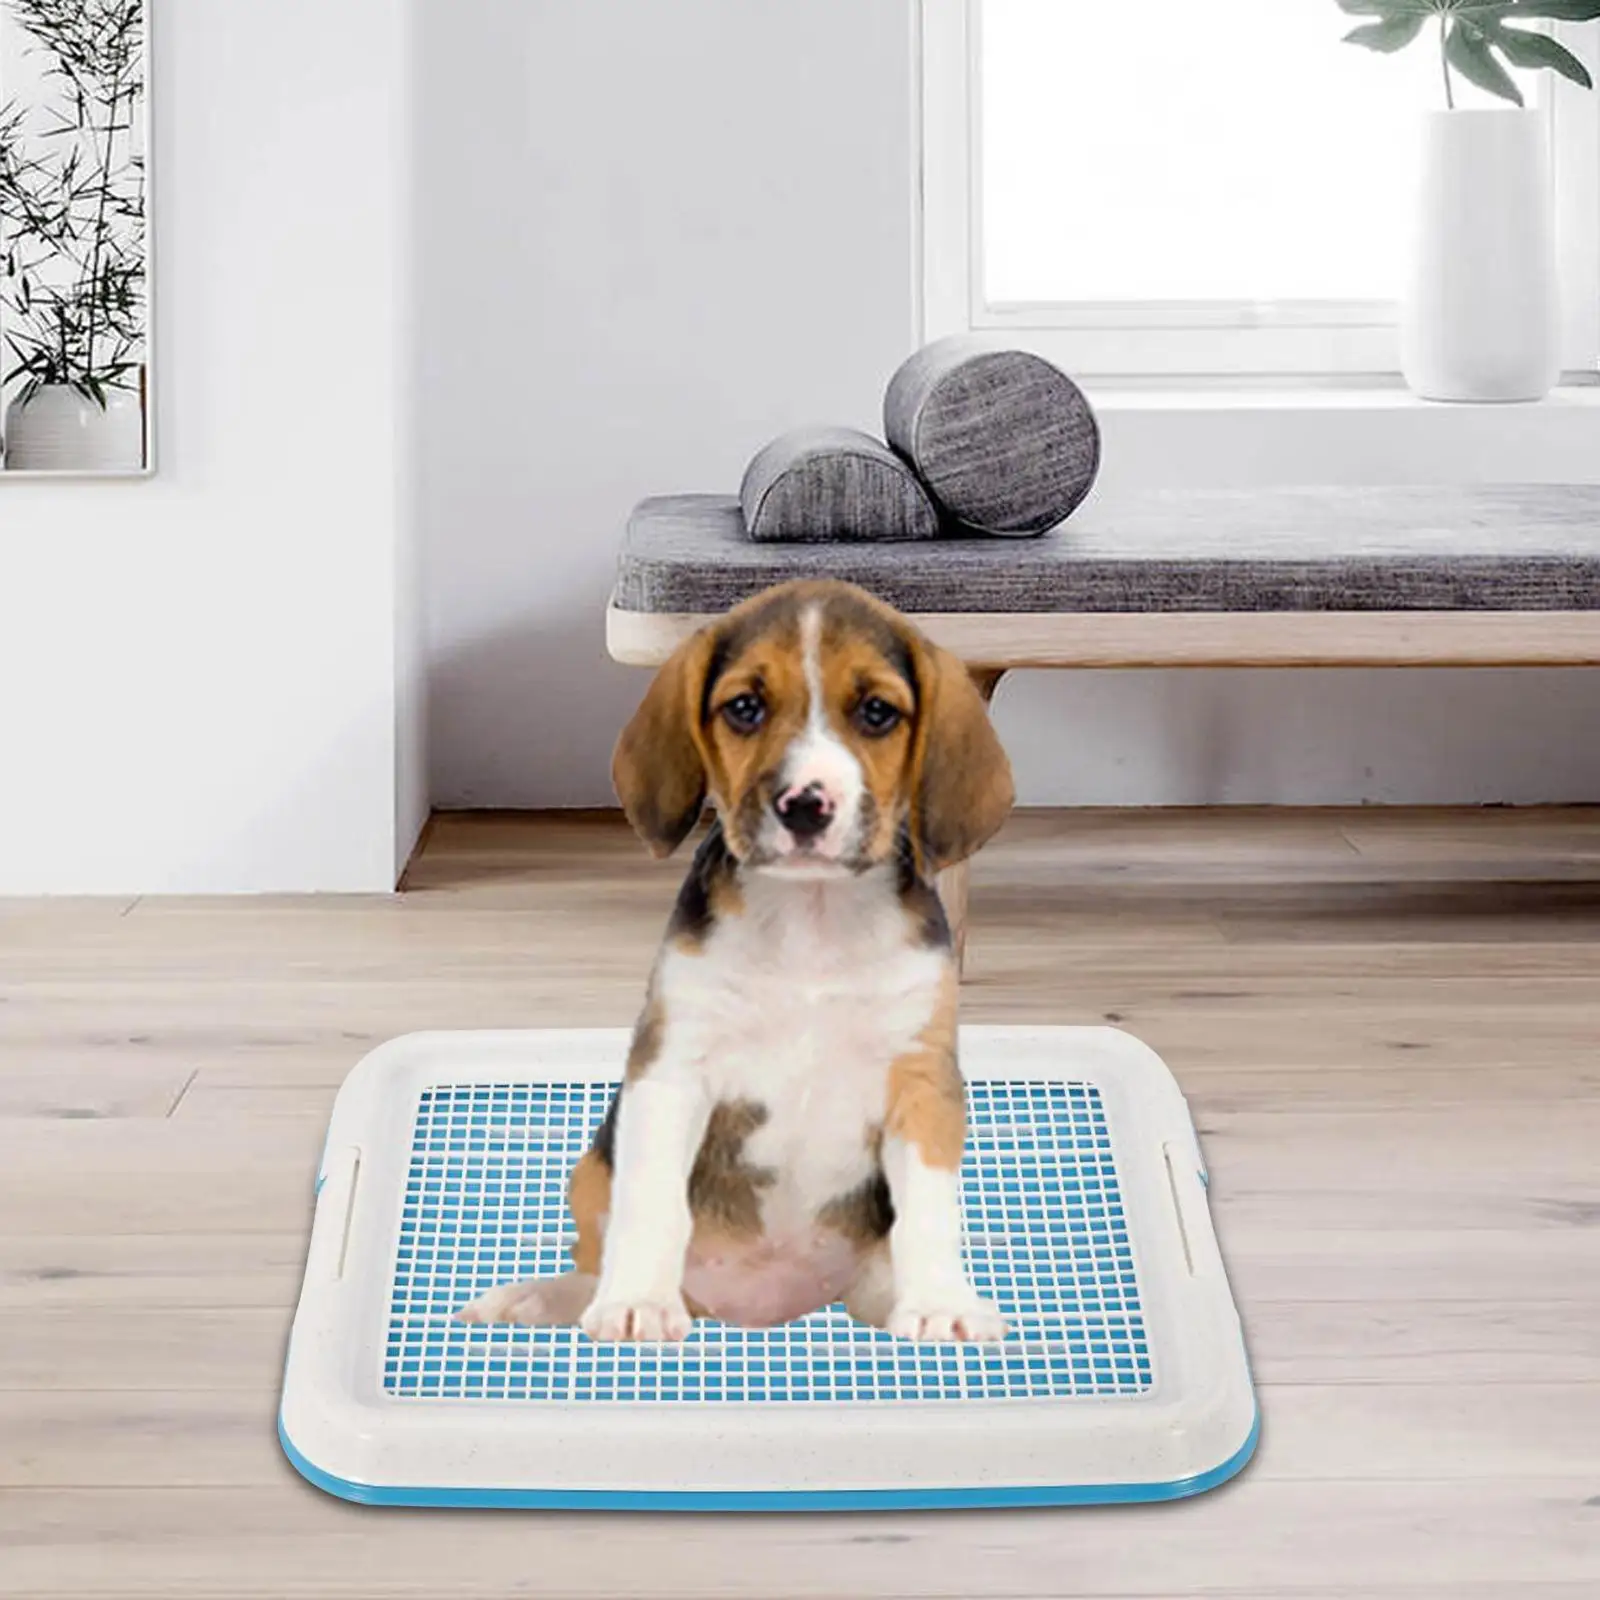 Dog Potty Toilet Training Tray Easy to Clean Removable Dog Potty Tray Mesh Training Tray Dog Litter Box for Small Size Dogs